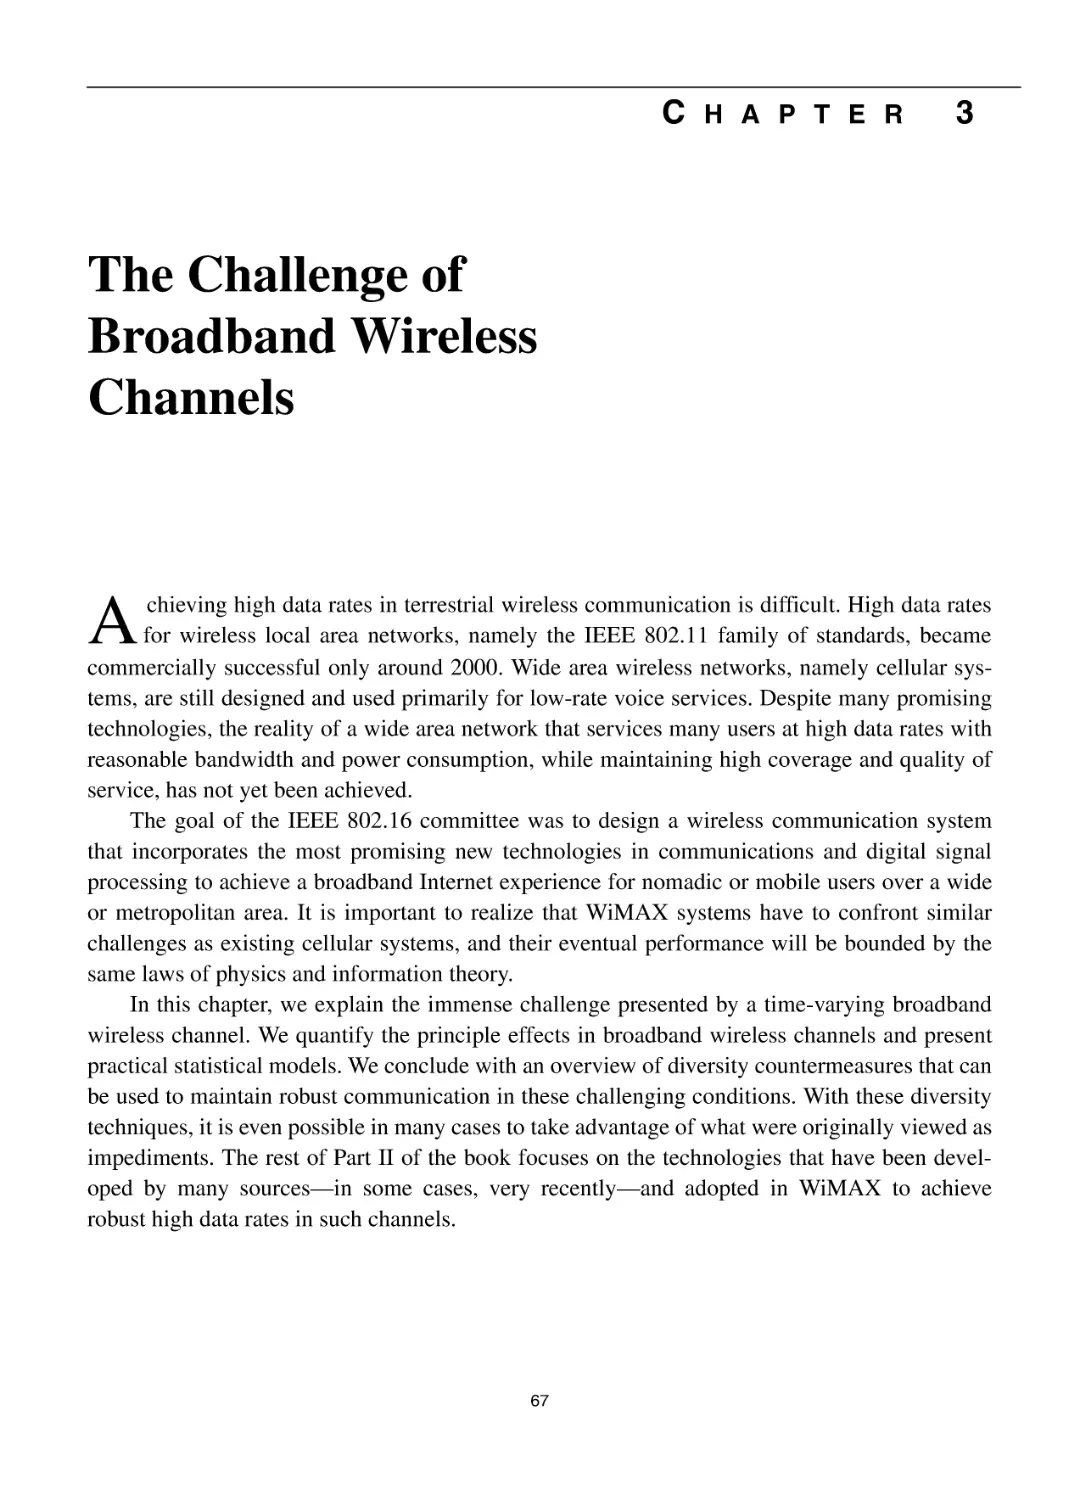 Chapter 3 The Challenge of Broadband Wireless Channels